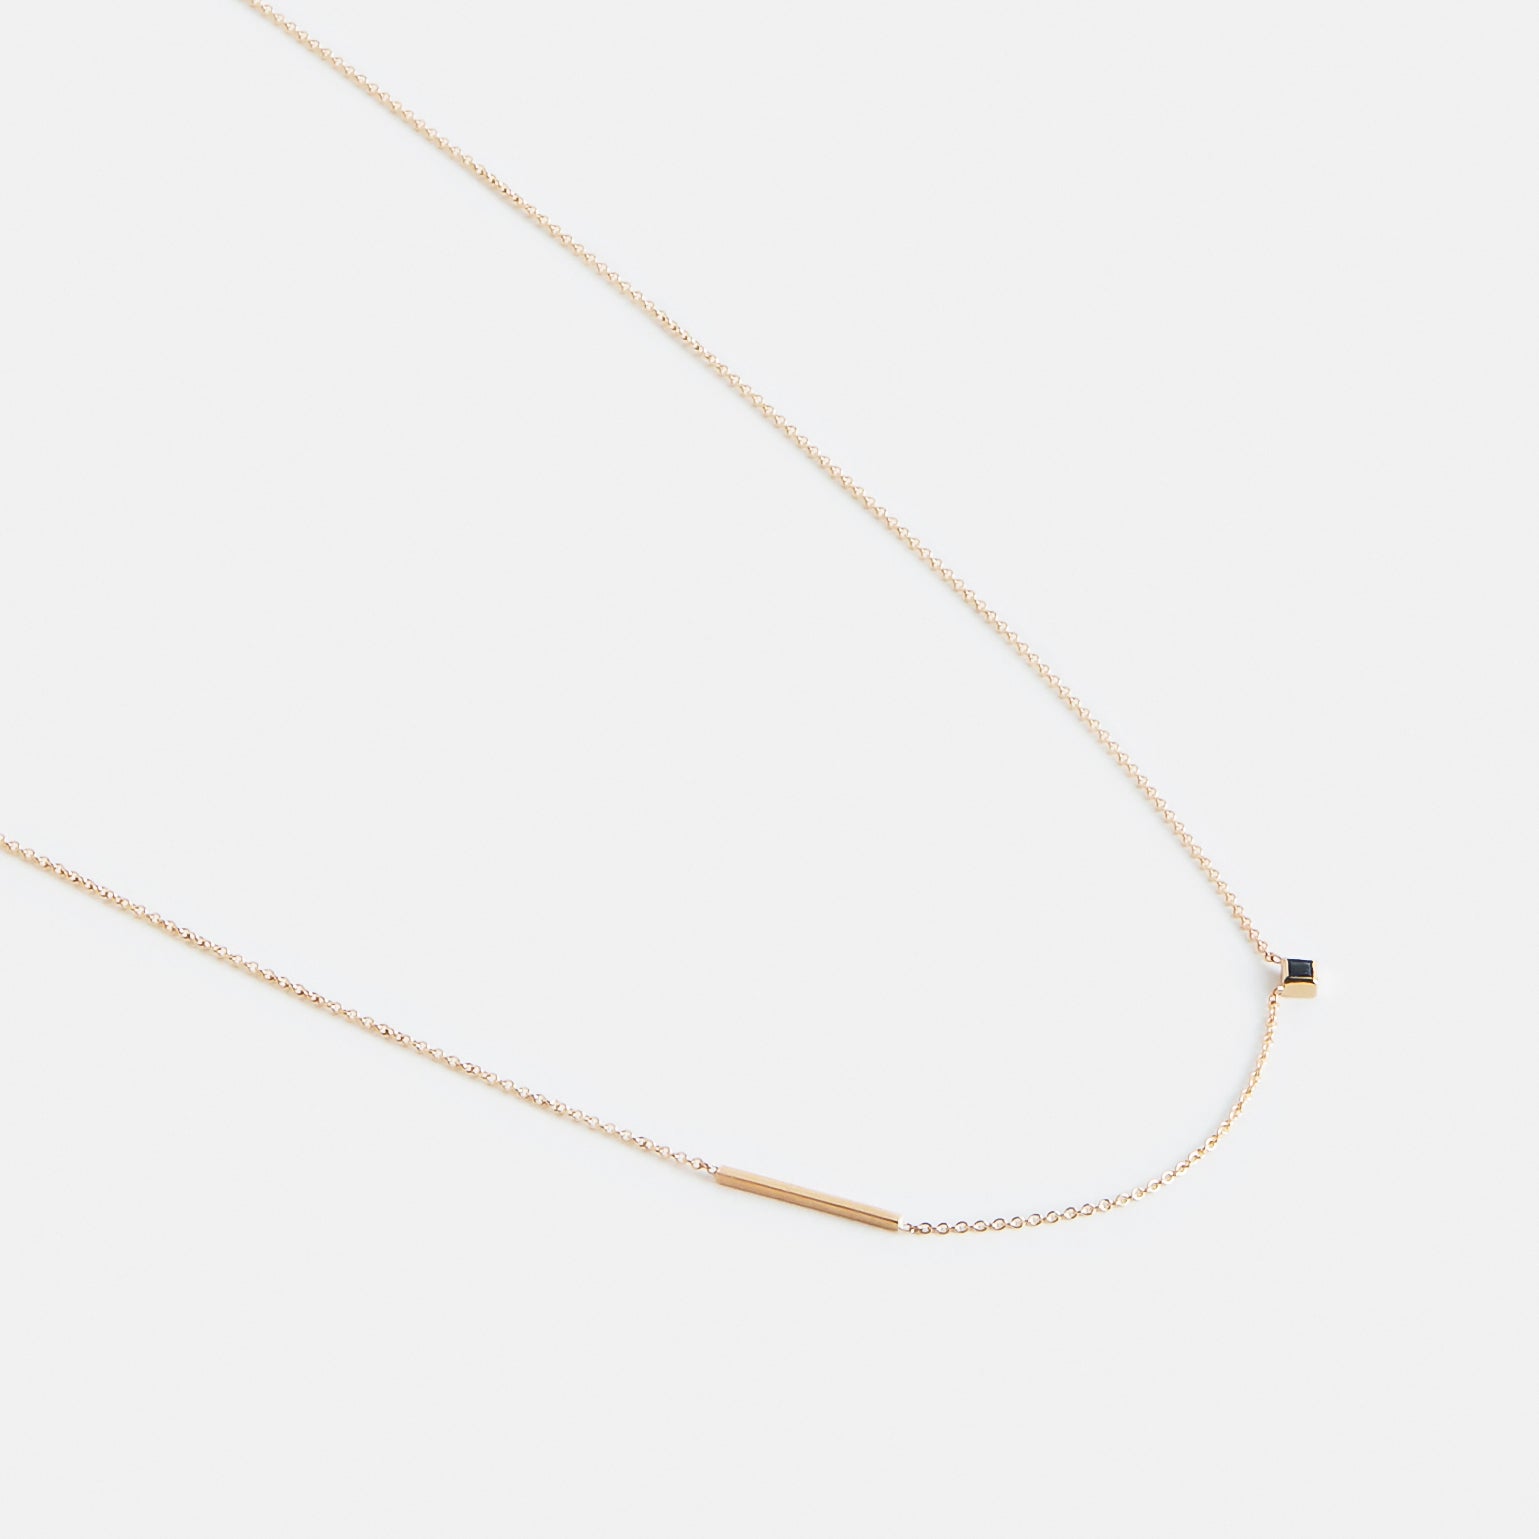 Inu Handmade Necklace in 14k Gold Set with White Diamond By SHW Fine Jewelry NYC